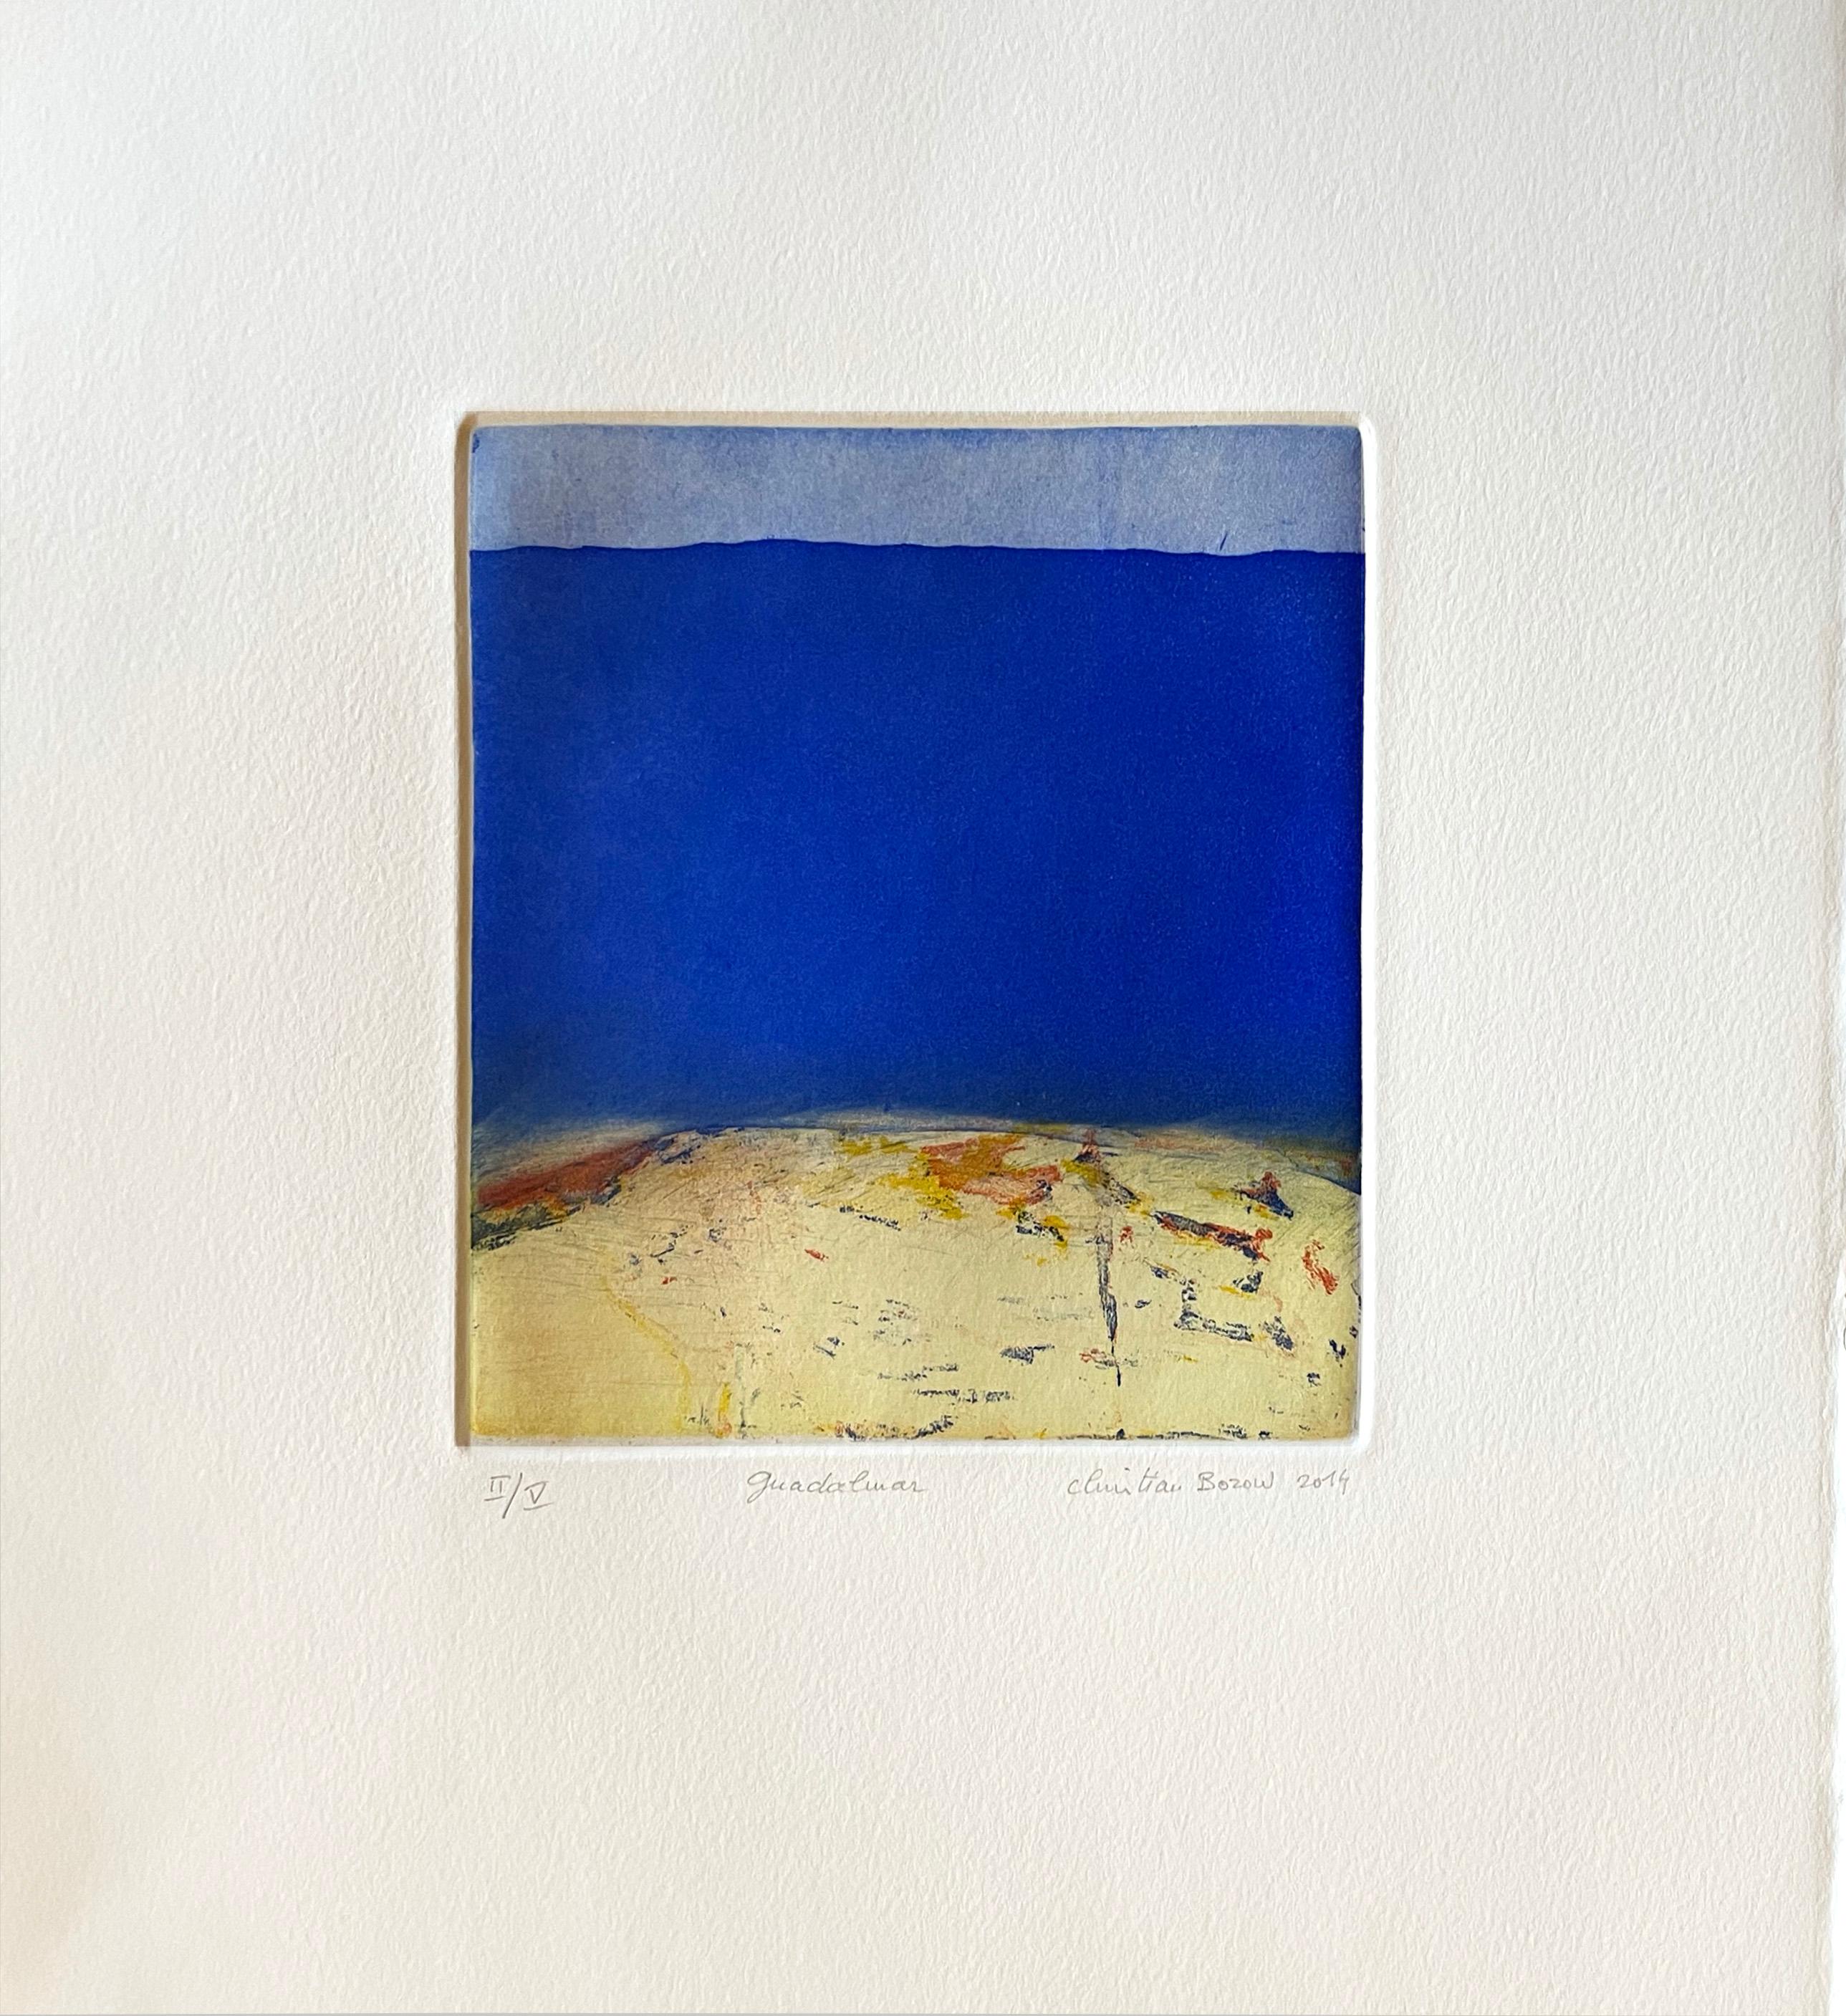 Signed, titled and numbered from the edition of 50.

Bozon's prints are often a balance between abstraction and landscape, which he creates with drypoint and aquatint. They reflect the colors and textures of Spain and Morocco, the two countries